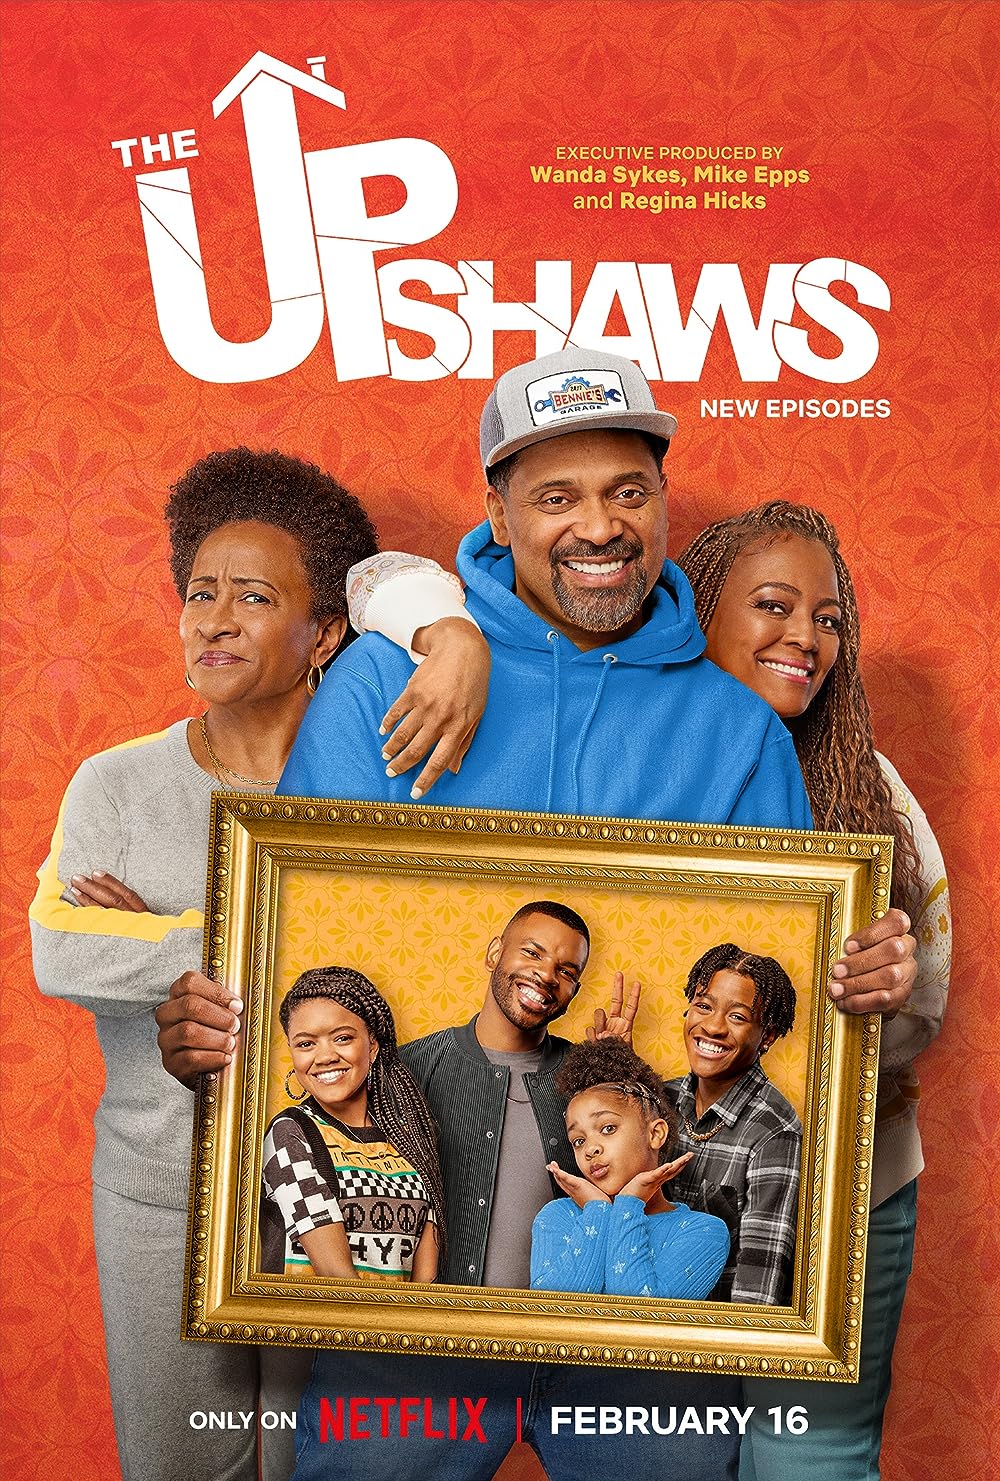 Part 4 of The Upshaws delivers more sidesplitting moments and heartfelt lessons as this resilient family tackles everyday trials with humor and heart. Available now on Netflix, this comedy series is a delightful blend of family dynamics and relatable humor. (August 17)